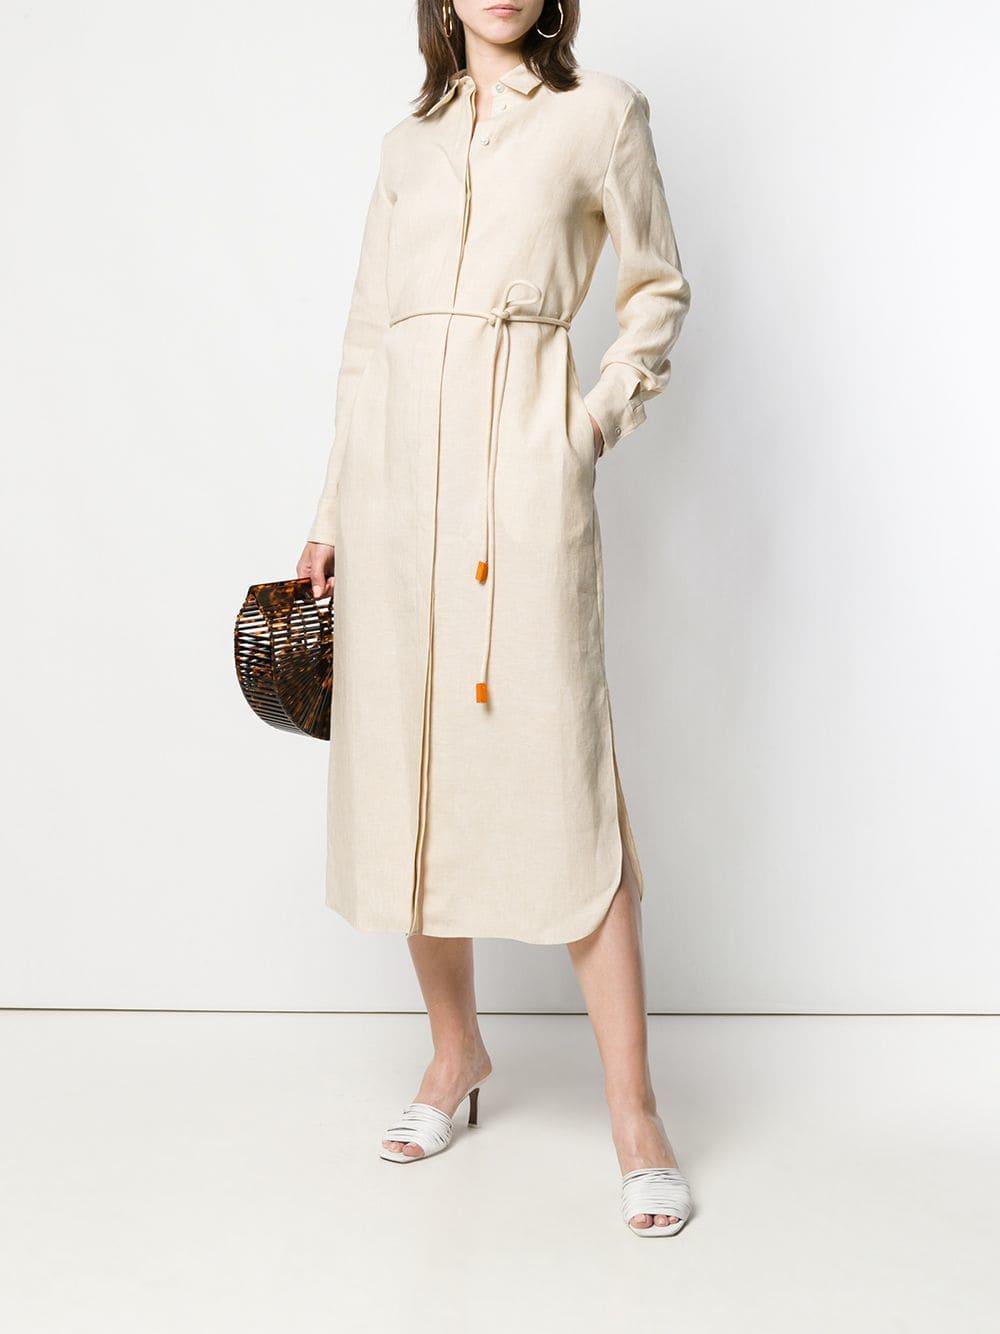 Theory Belted Shirt Dress in Natural - Lyst